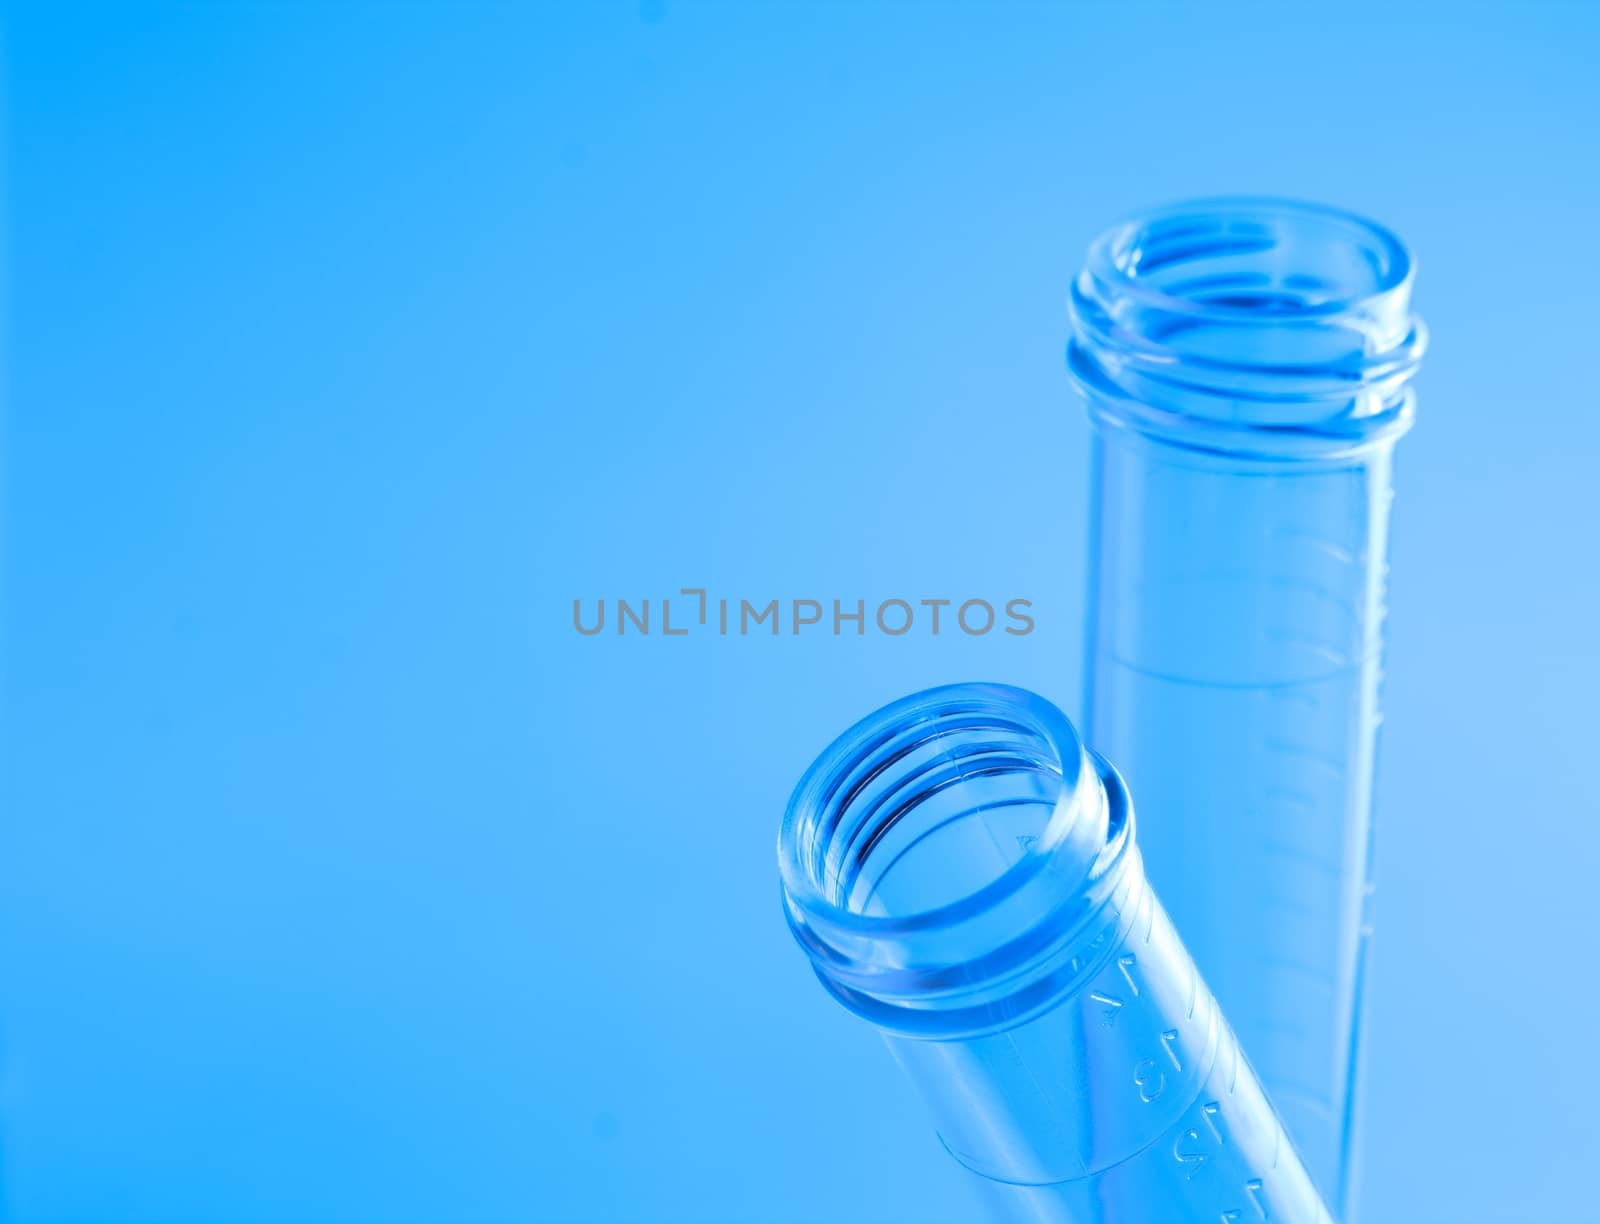 detail of the test tubes in laboratory  by donfiore